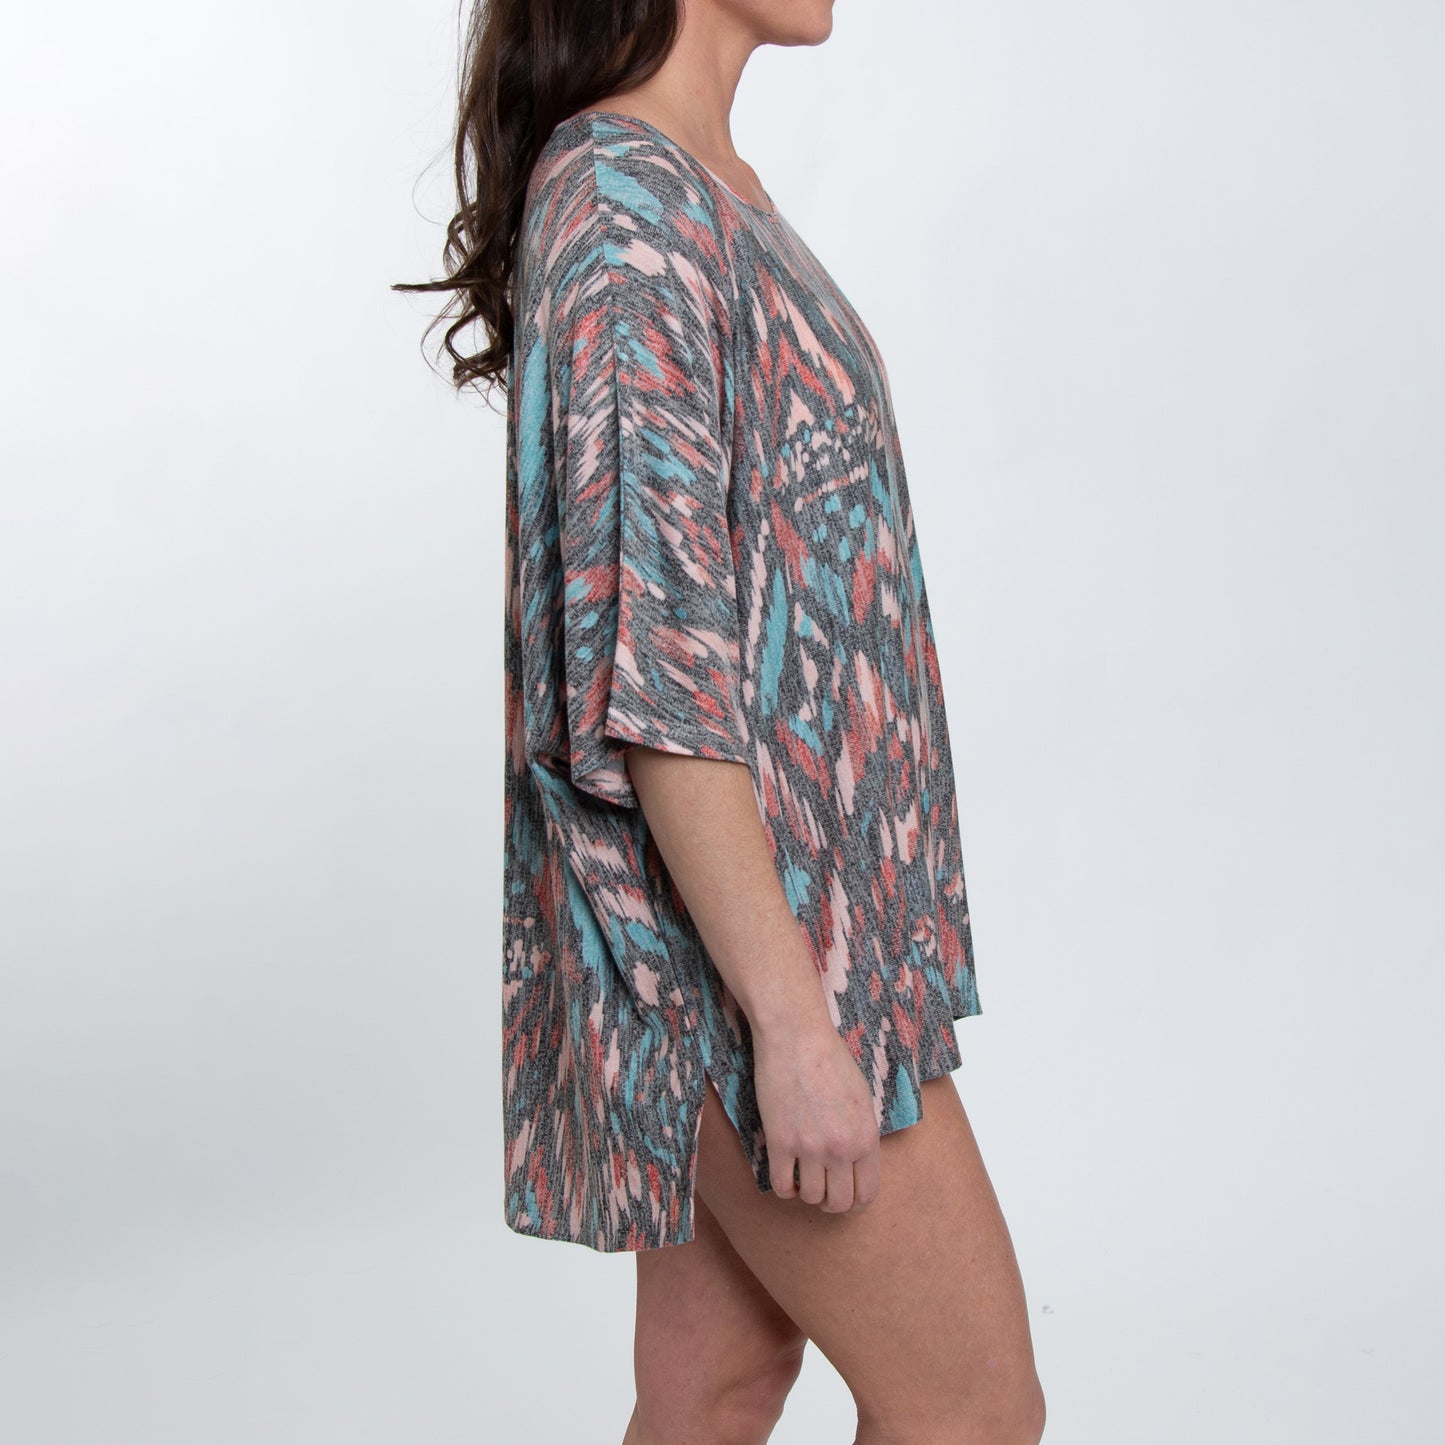 Elsie Desert Ikat Printed One Size Beach Swimsuit Cover Up